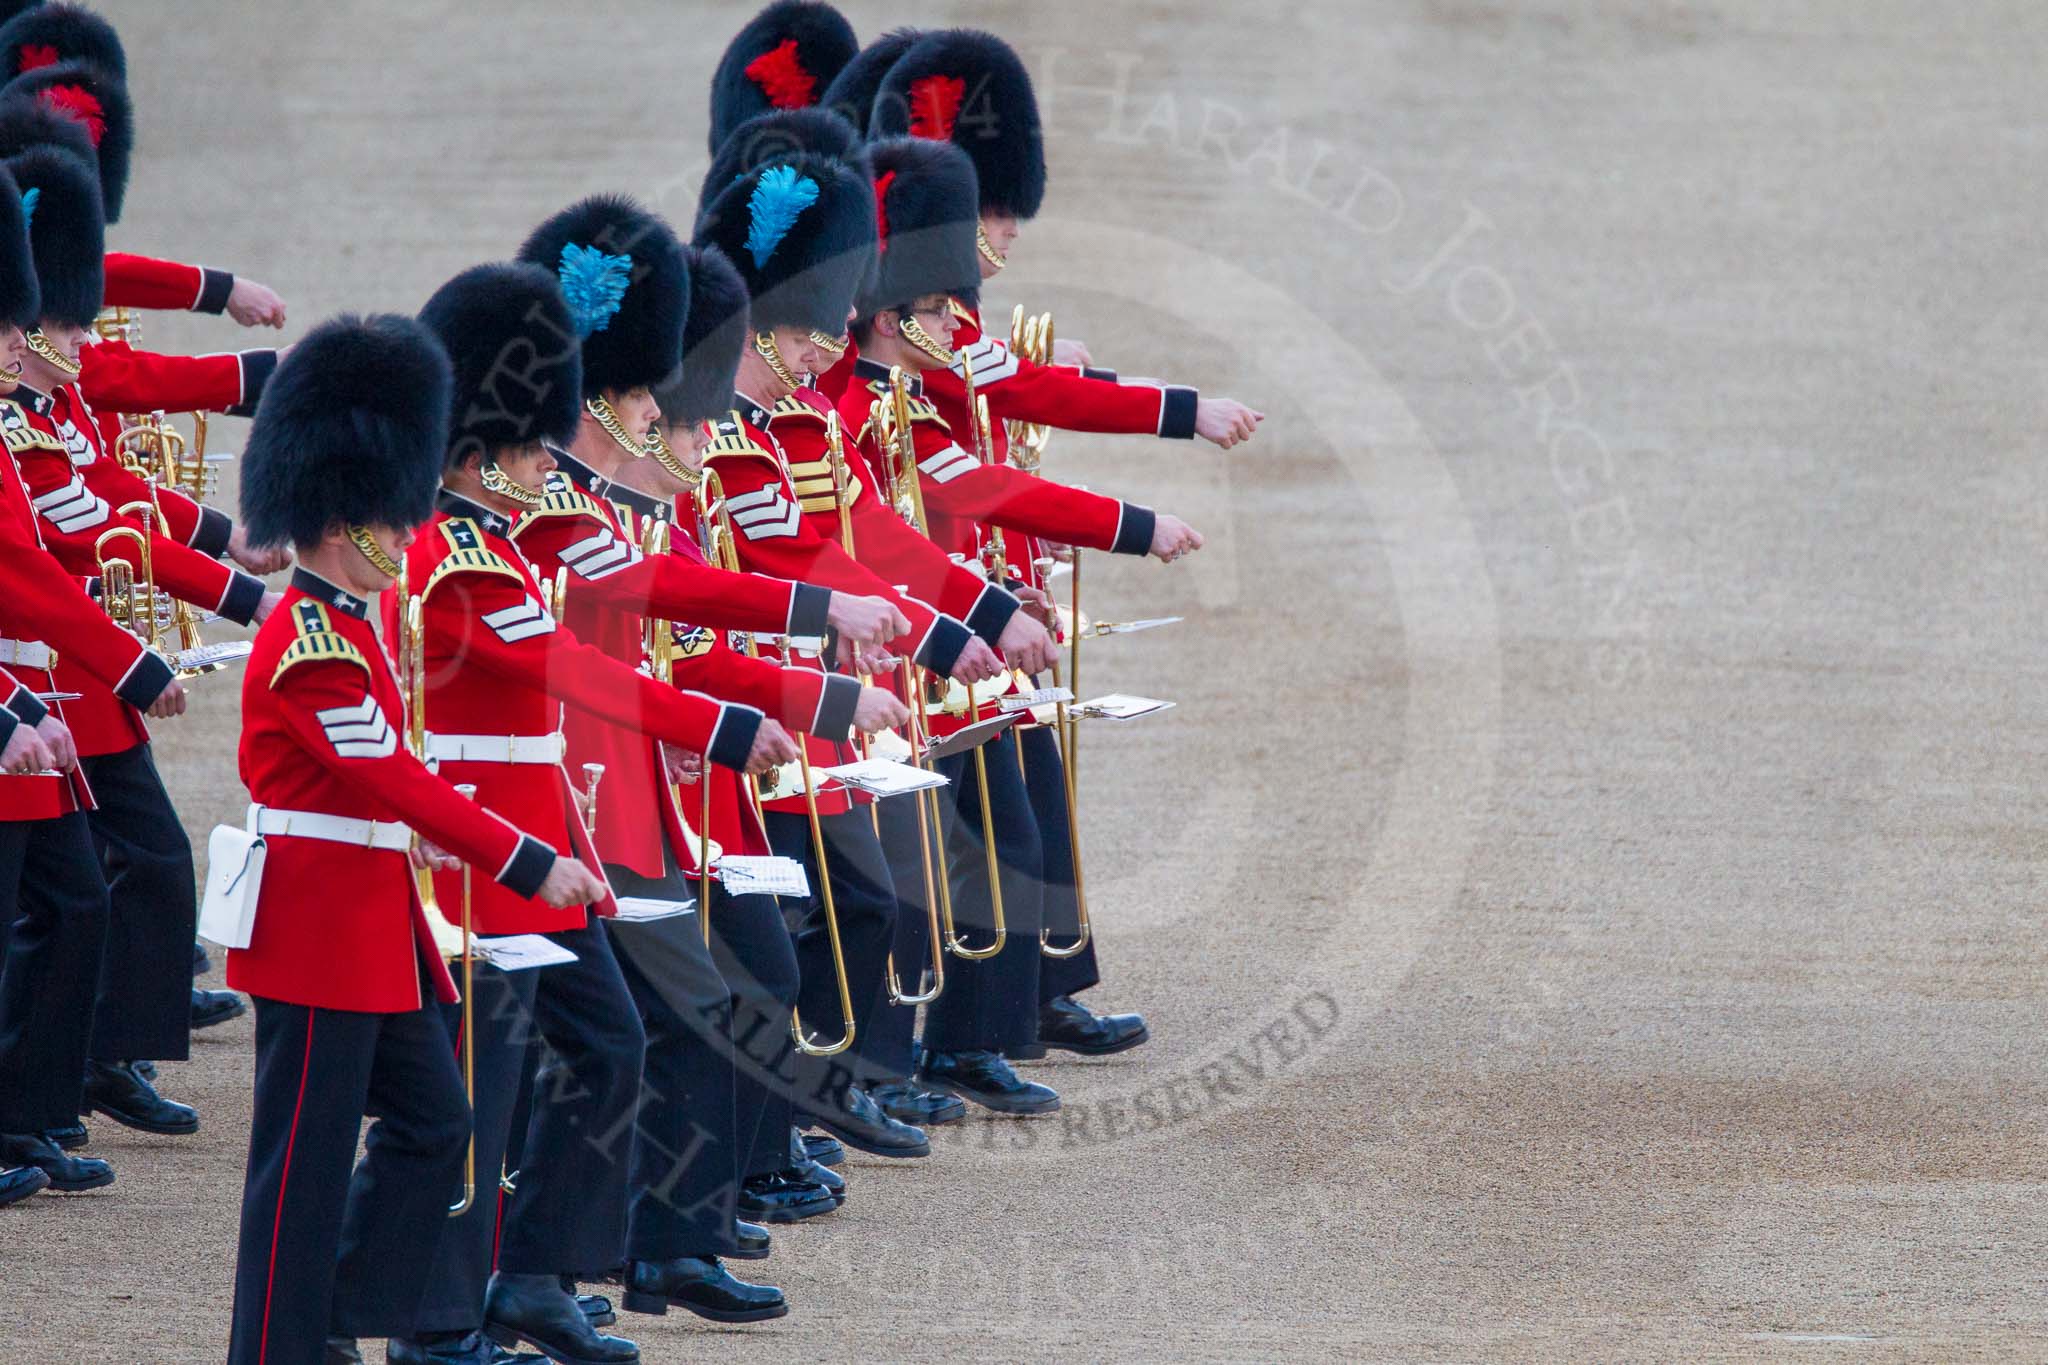 Beating Retreat 2014.
Horse Guards Parade, Westminster,
London SW1A,

United Kingdom,
on 11 June 2014 at 20:11, image #45